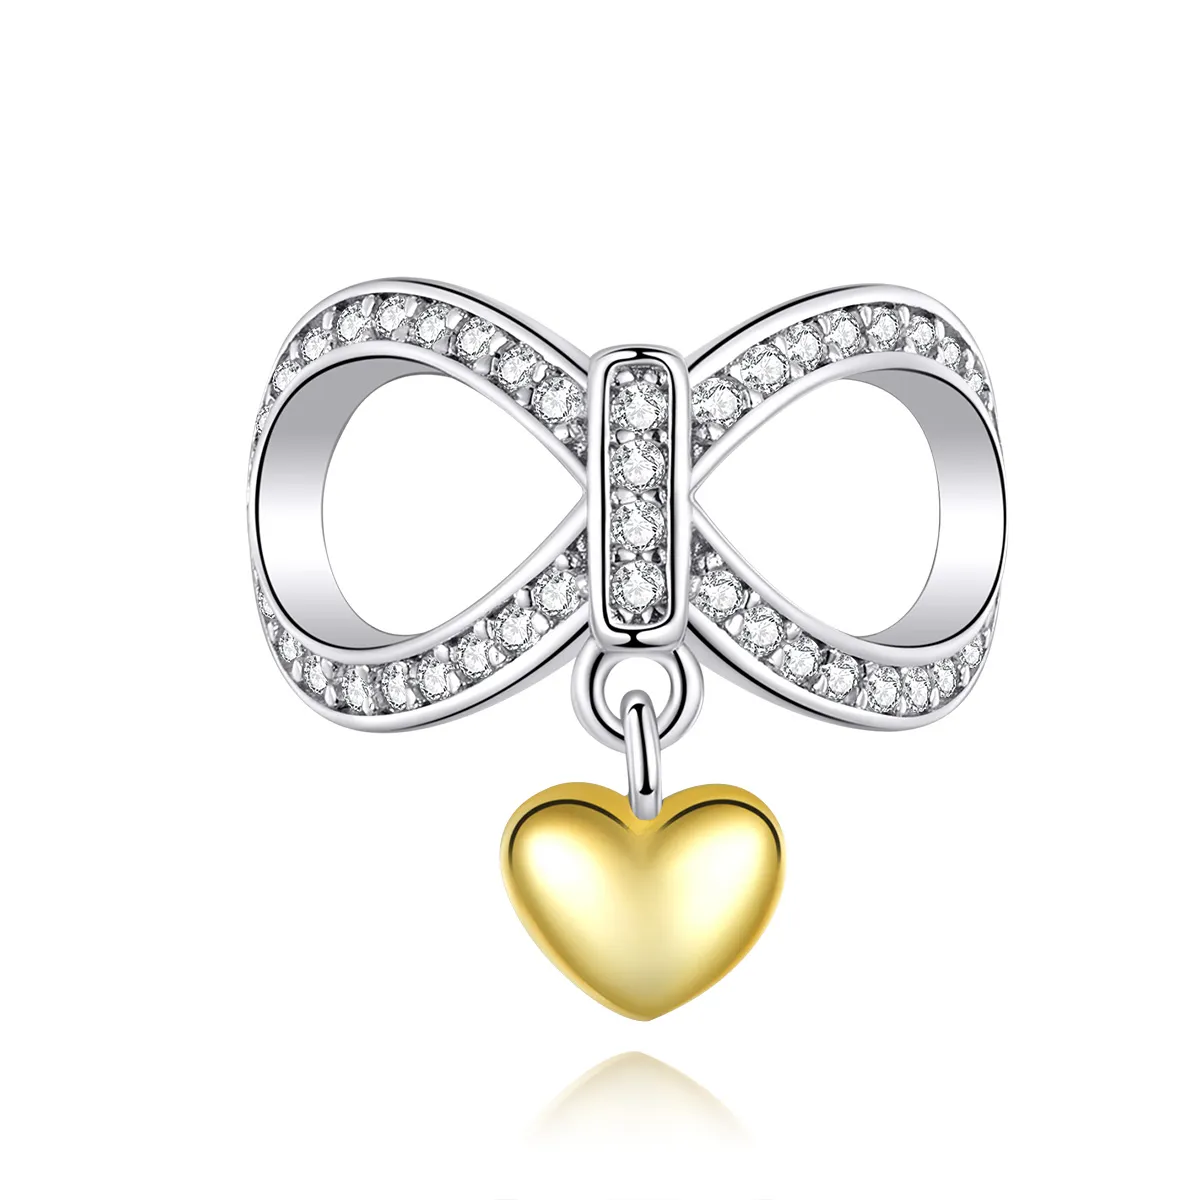 Pandora Style Silver & Gold-Plated Infinite Love Charm - SCC1300